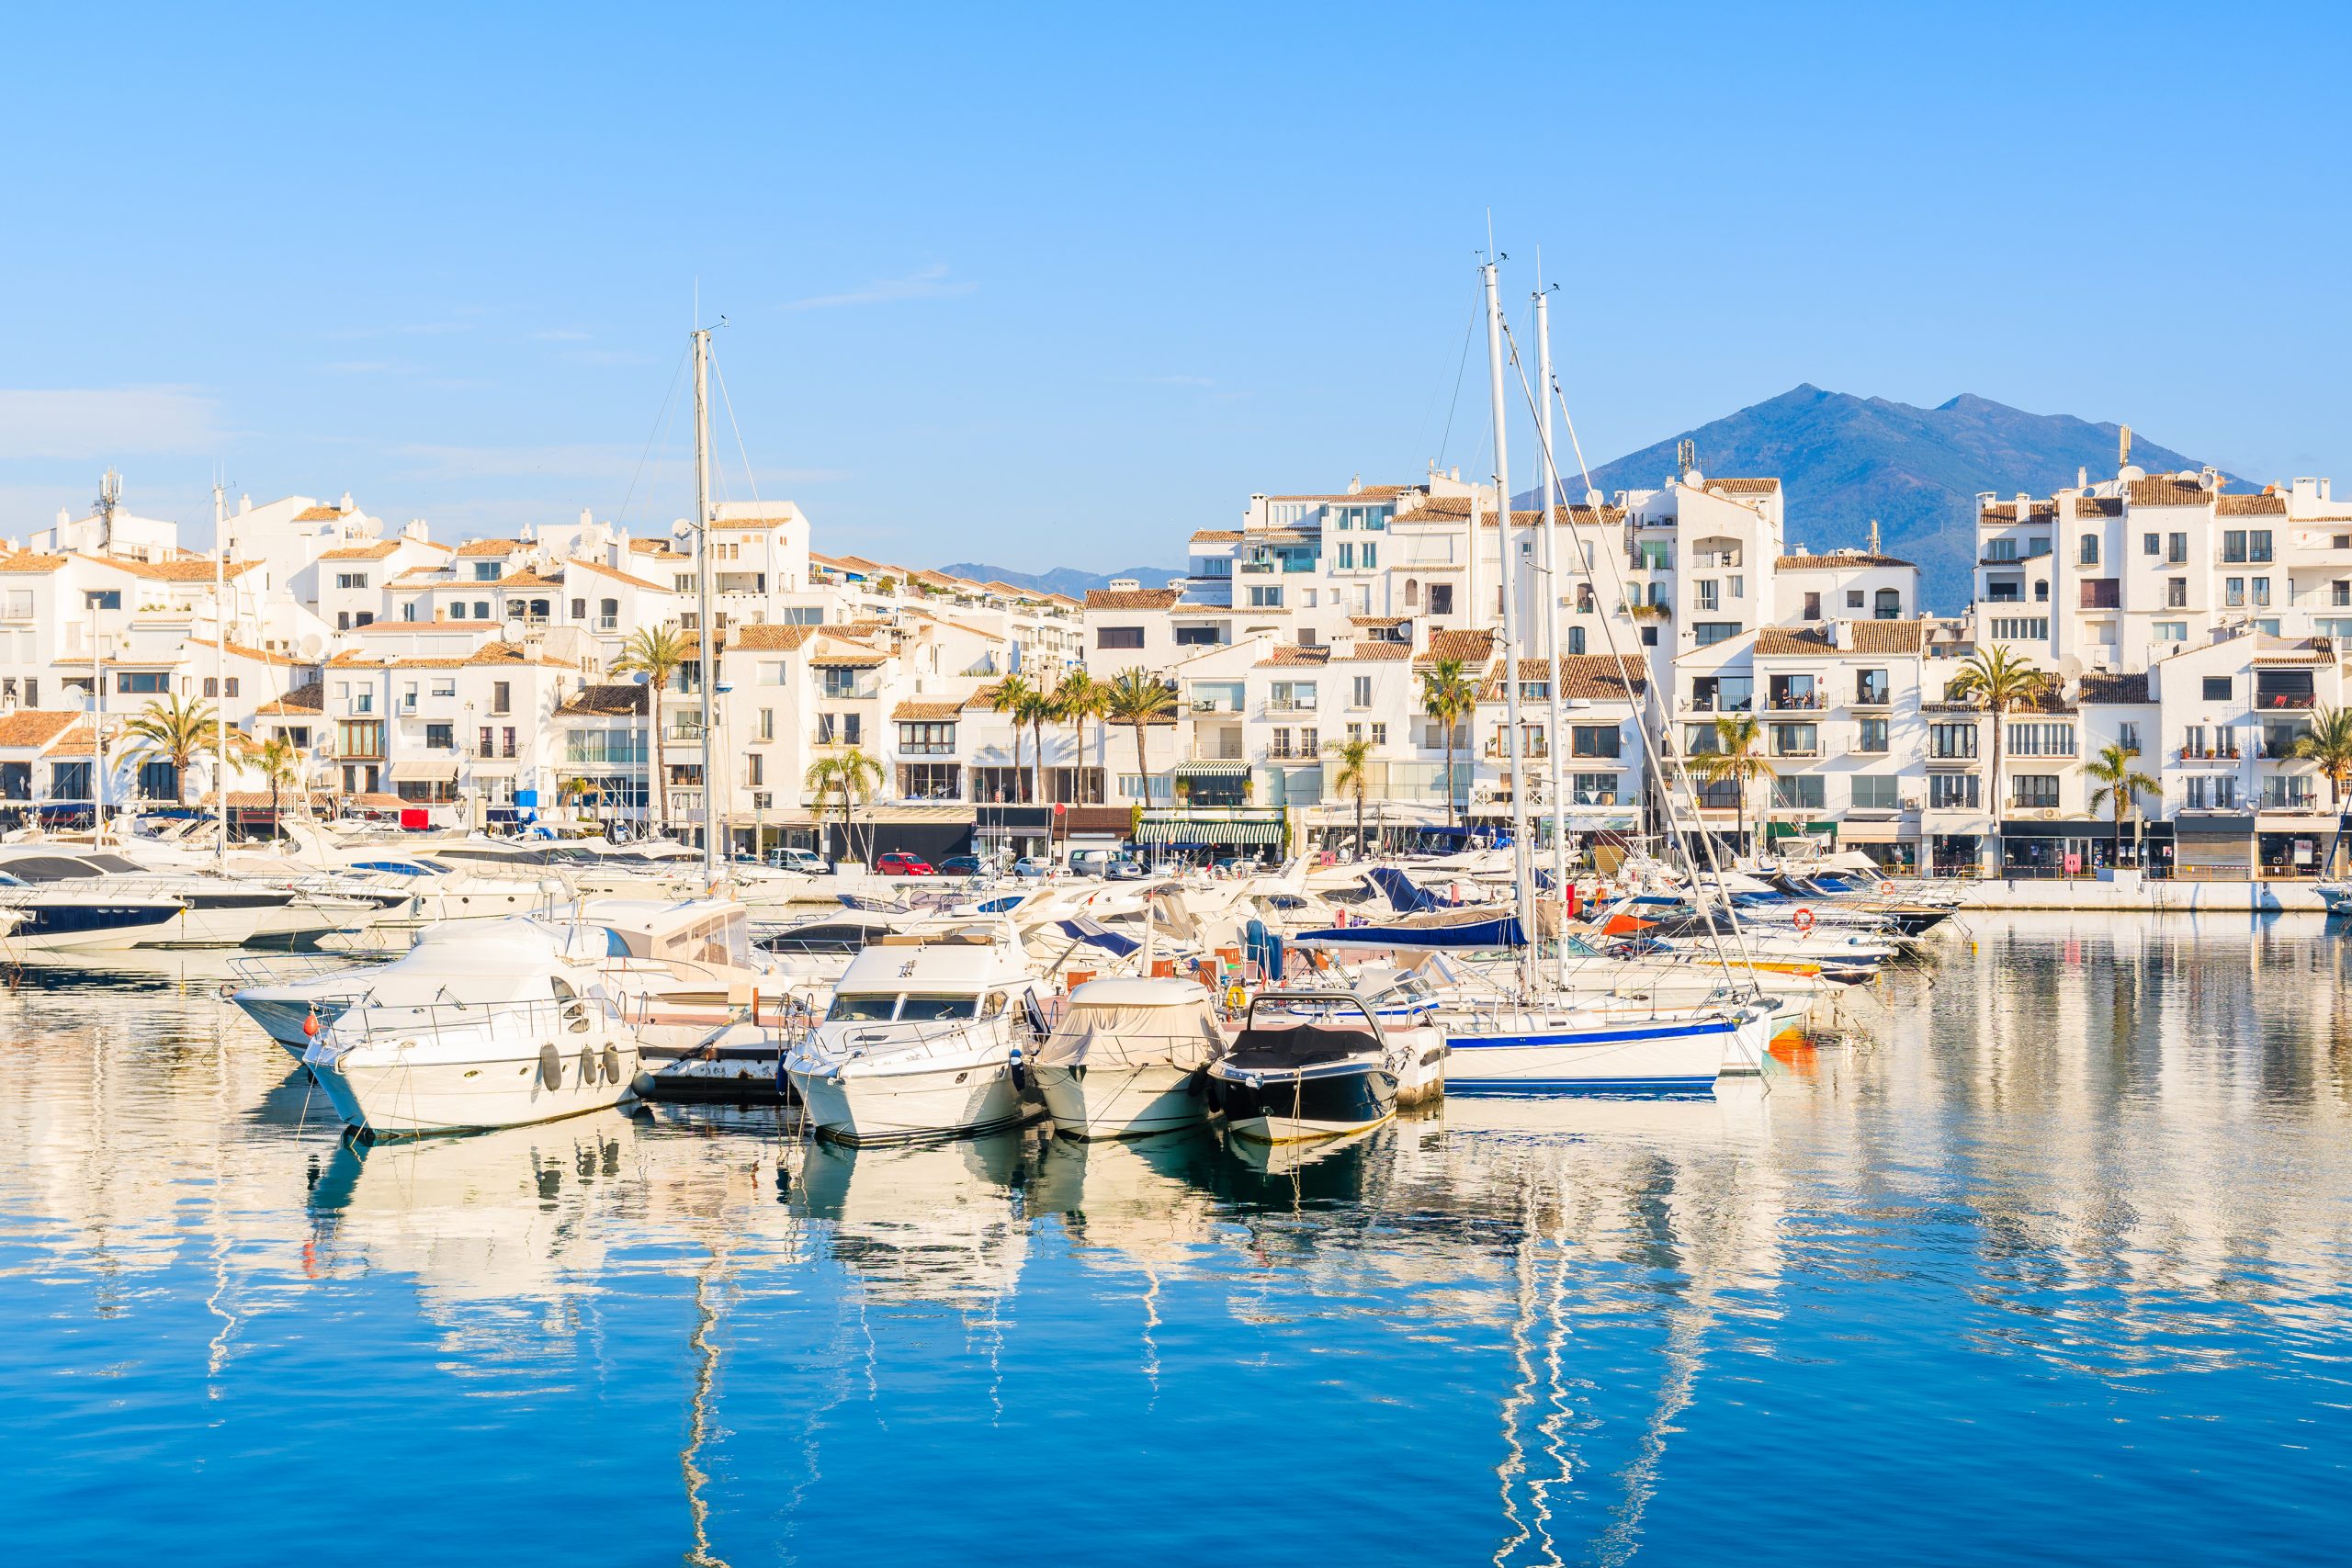 View Of Puerto Banus Marina With Boats And White Houses In Marbe